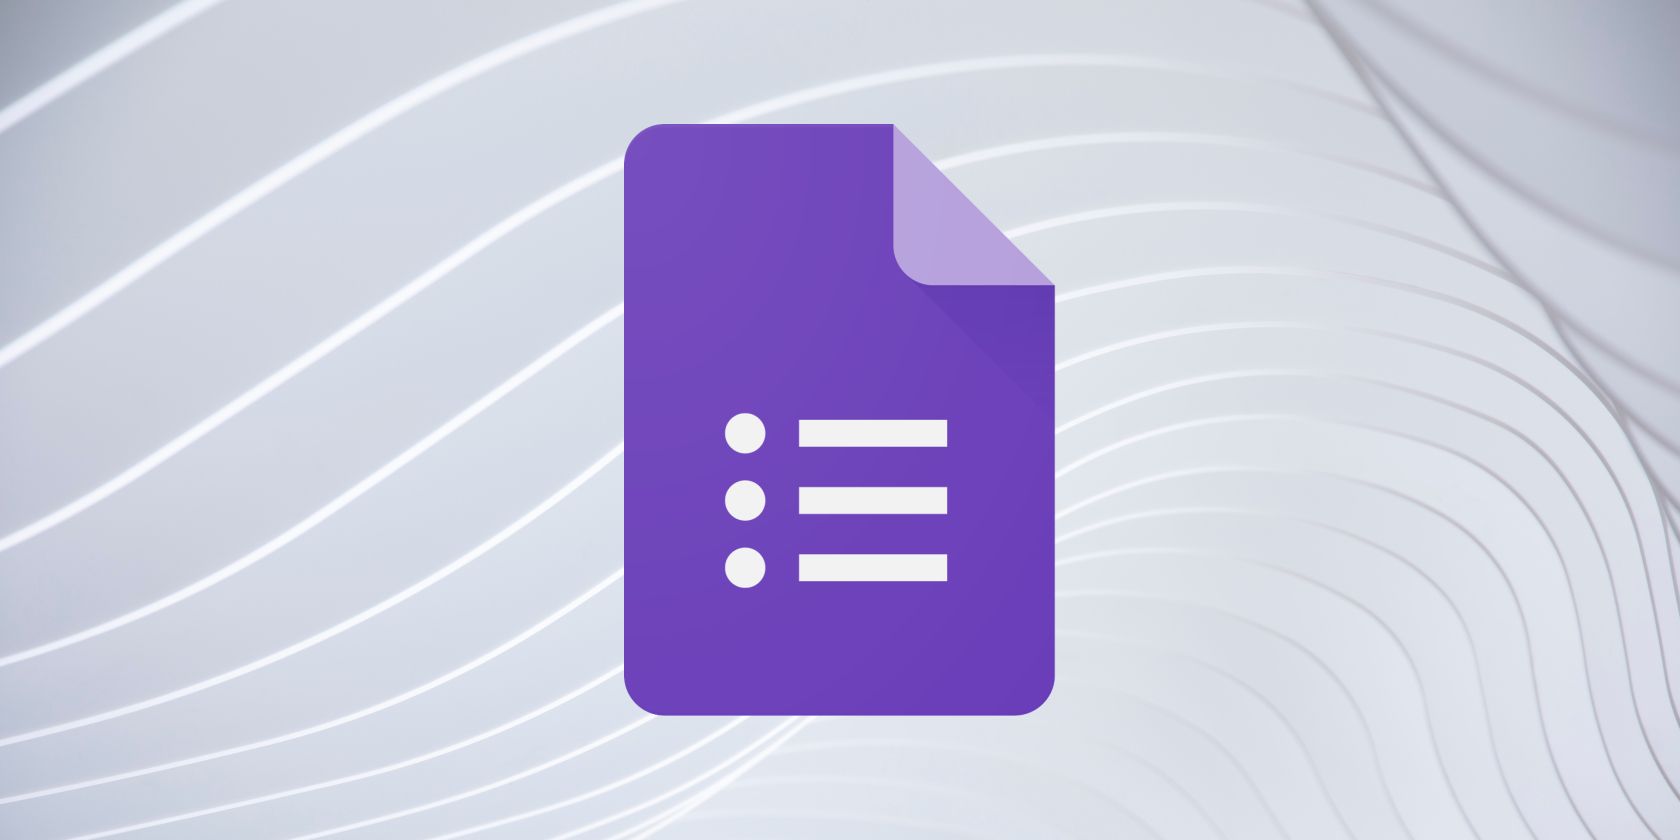 How to Prevent Duplicate Response in Google Forms